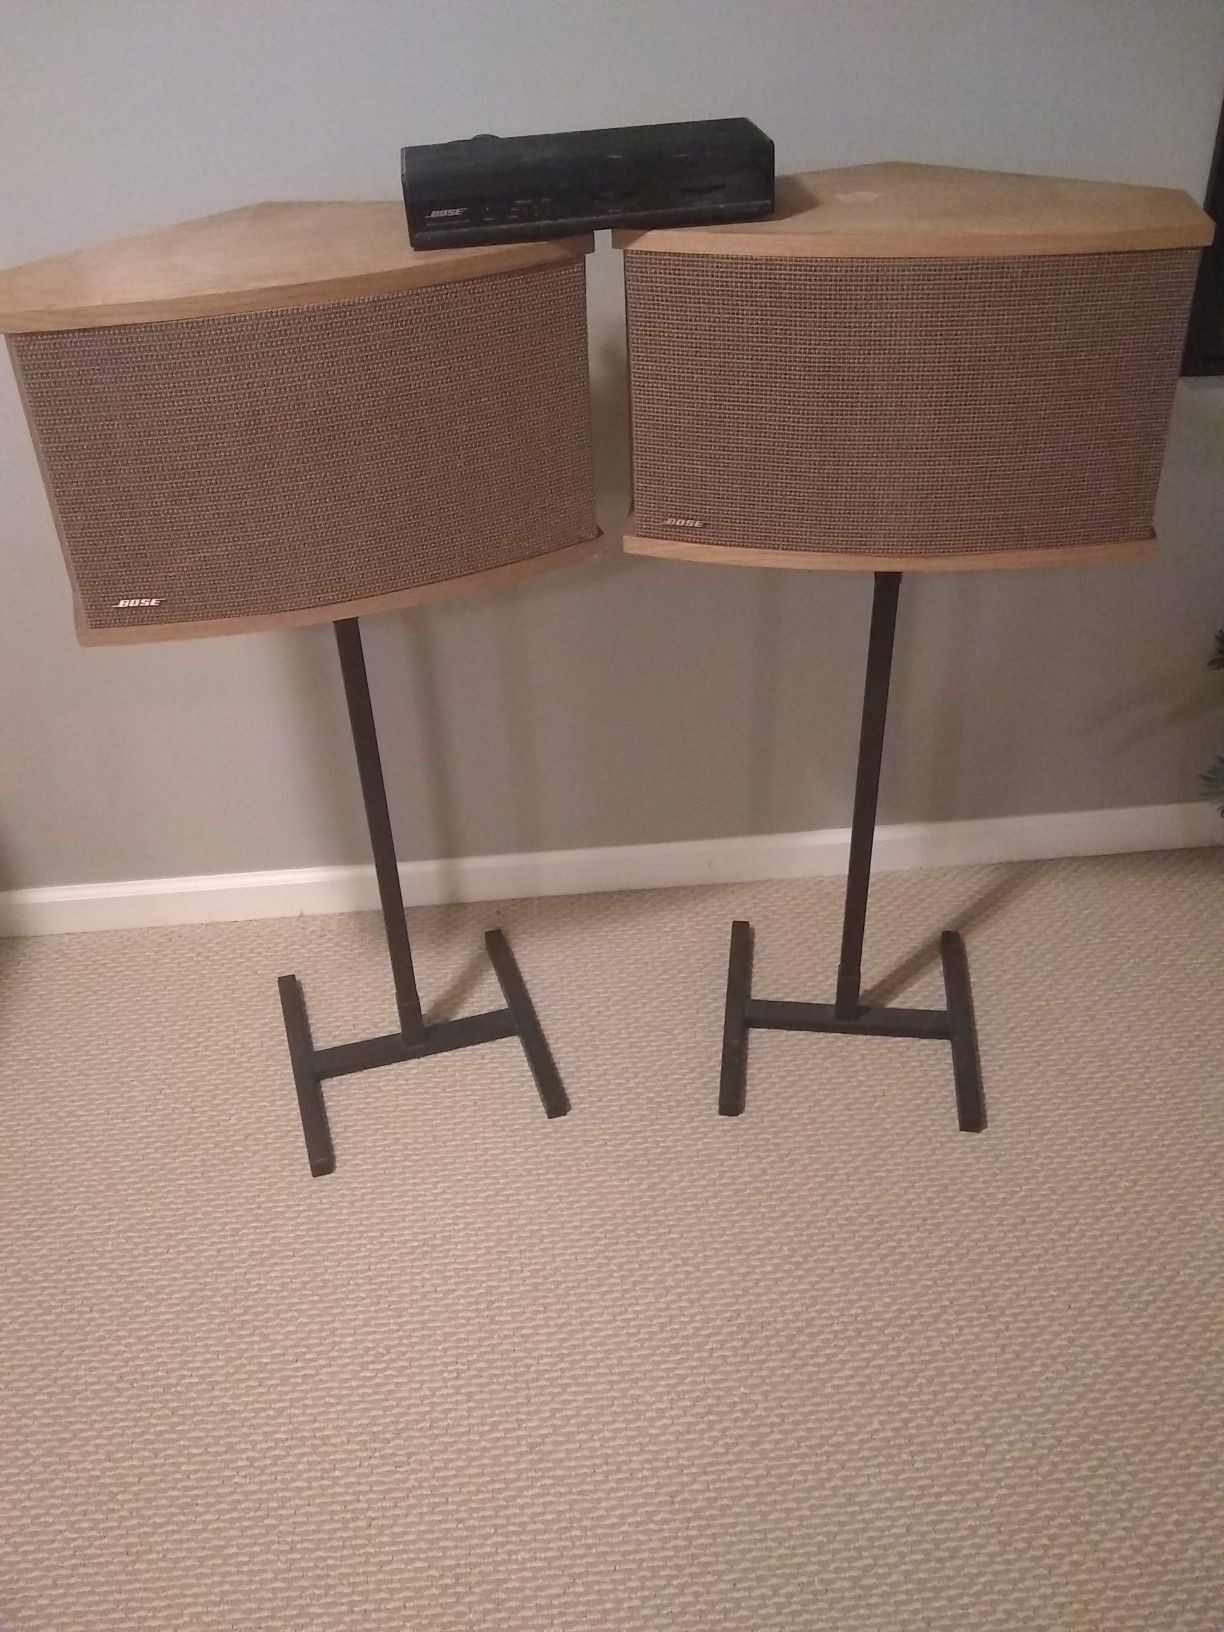 Speakers Bose 901 with equalizer and unlimited wattage and speaker stands